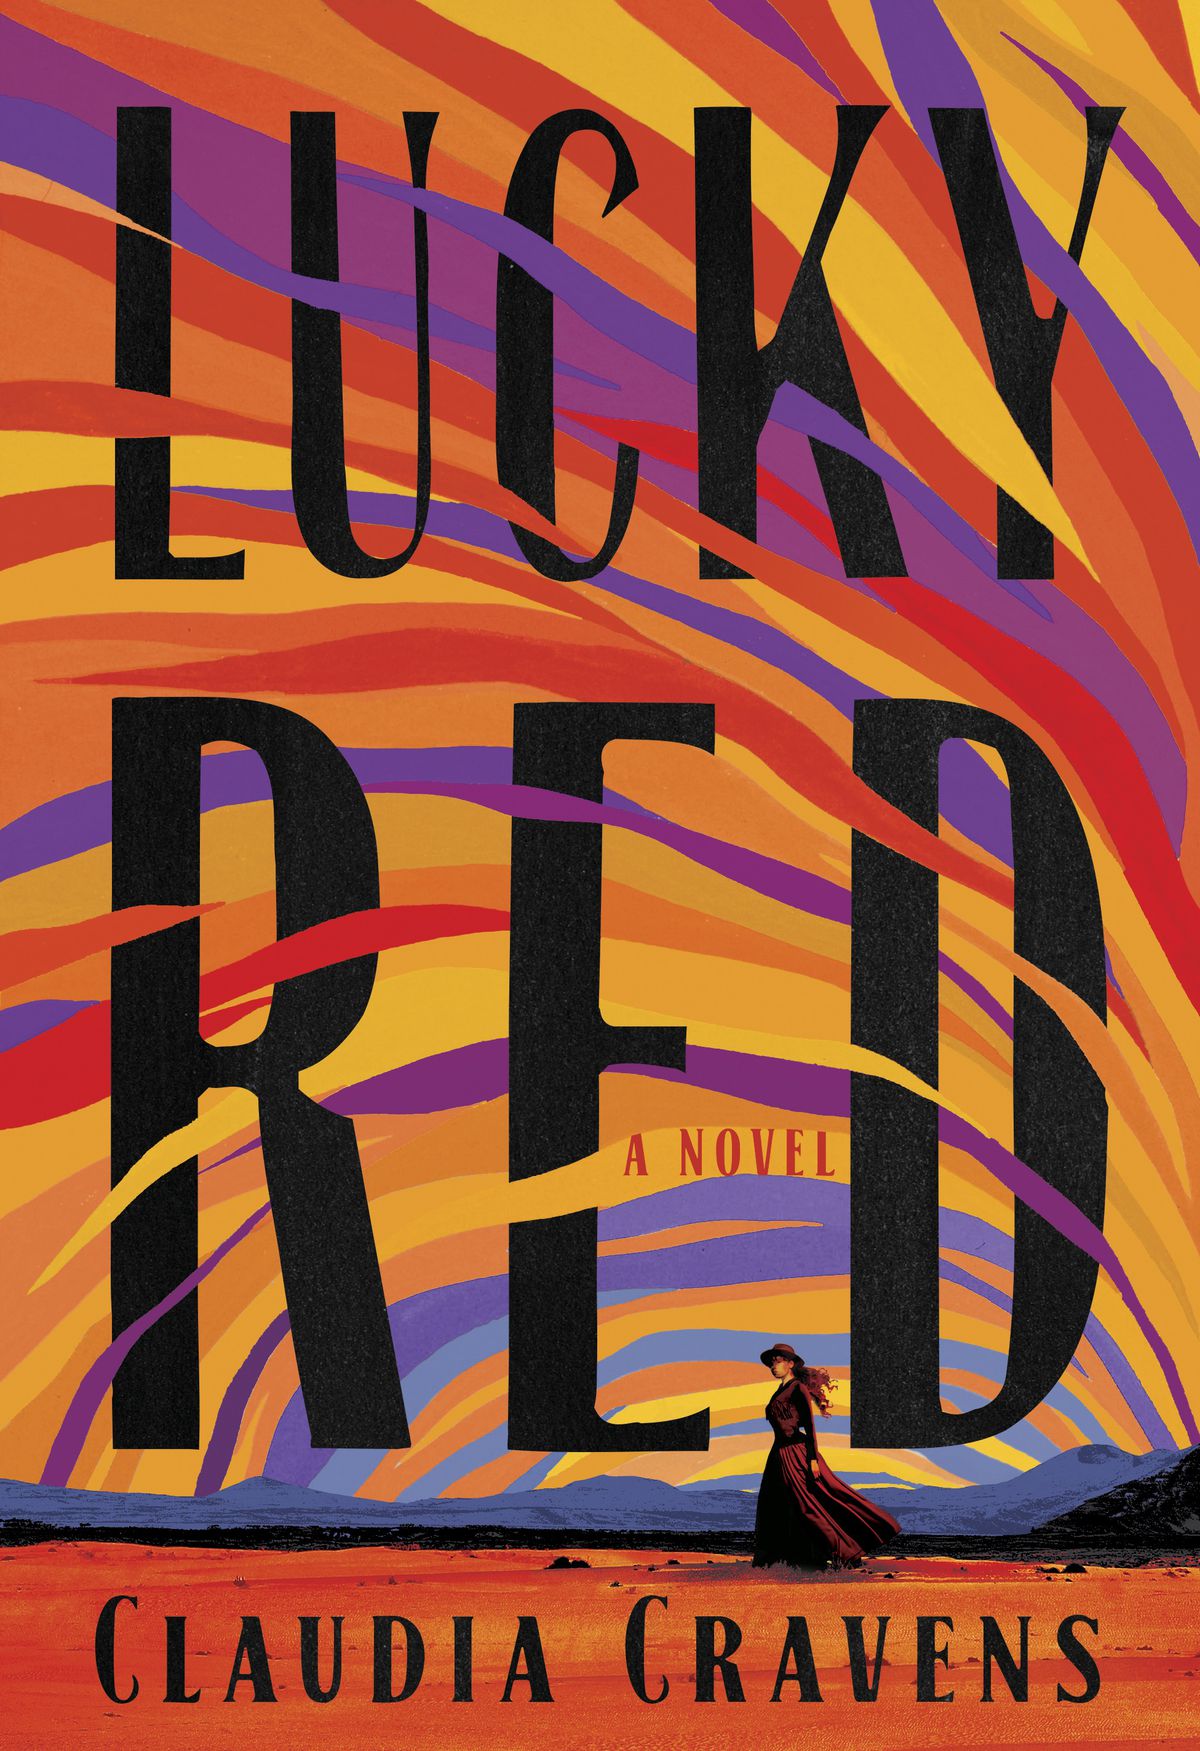 Cover image for Claudia Cravens’ Lucky Red, which shows a woman standing in the desert with a colorful sky painted with purple, red, yellow and orange lines.